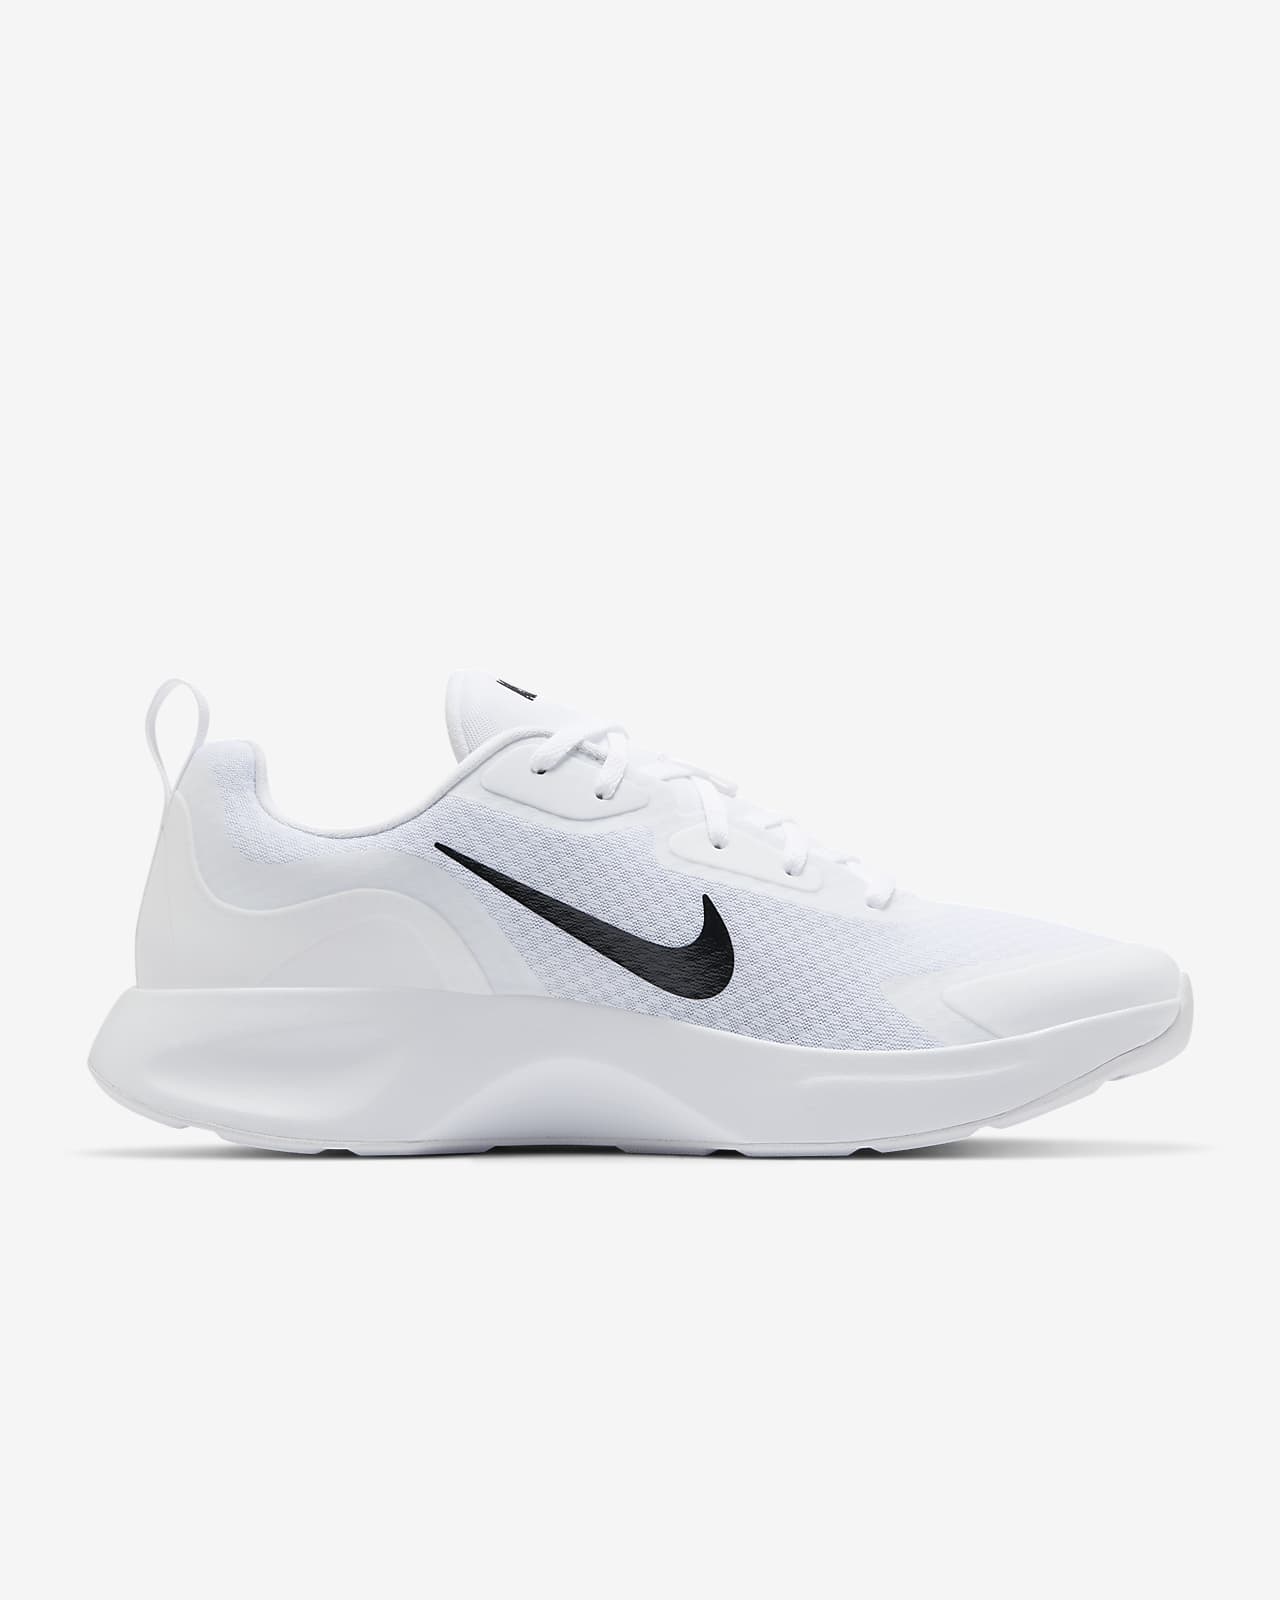 Chaussure Nike Wearallday pour Homme